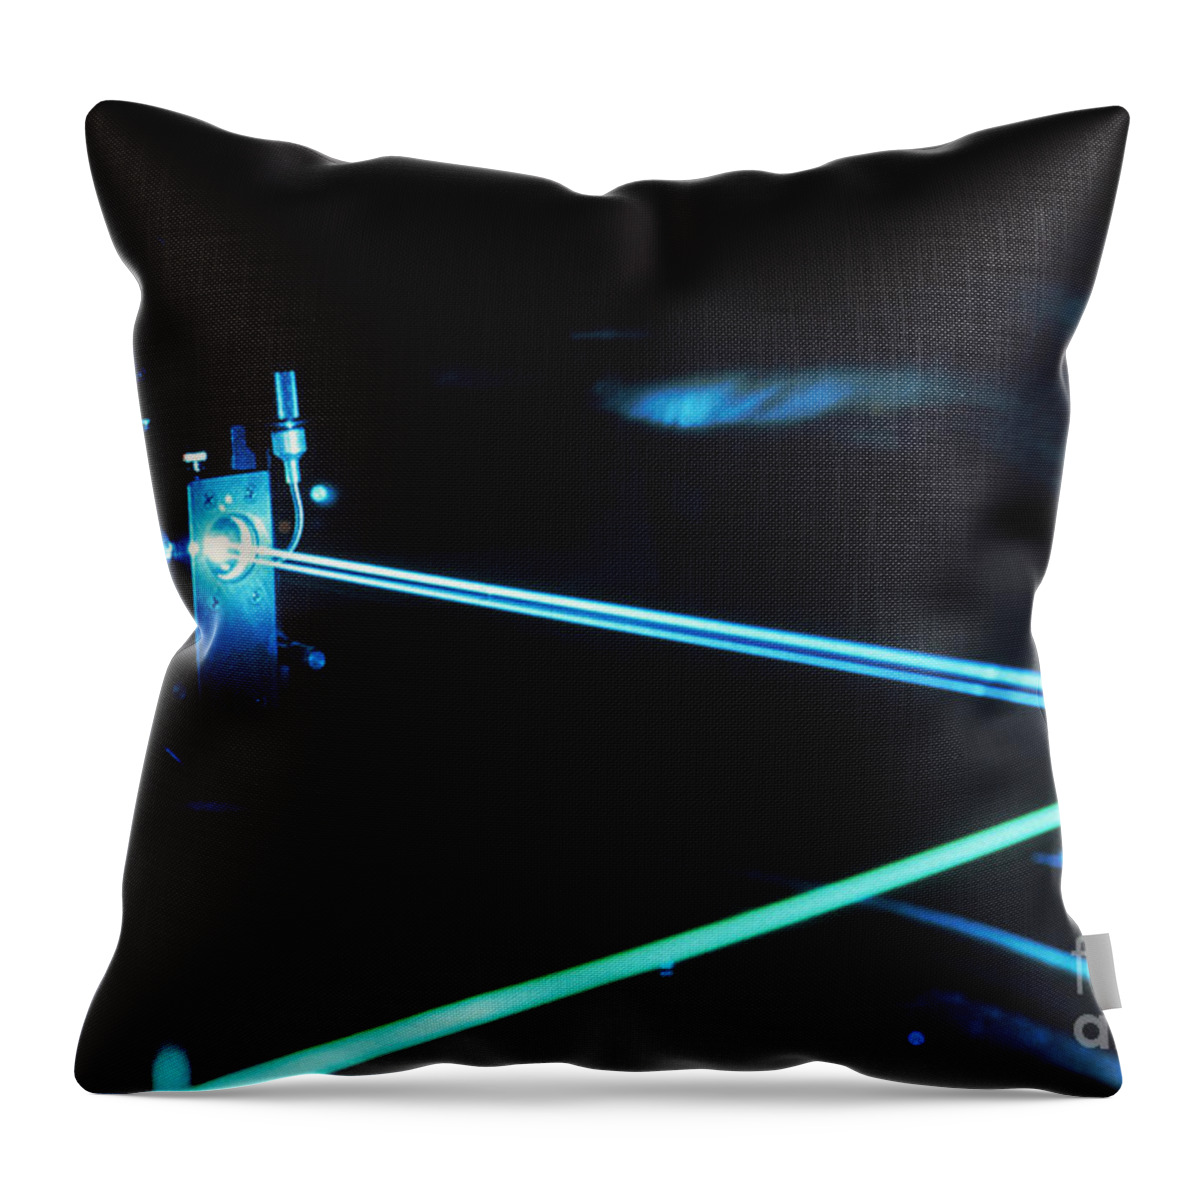 Beam Of Light Throw Pillow featuring the photograph Argon-ion Laser by Science Source